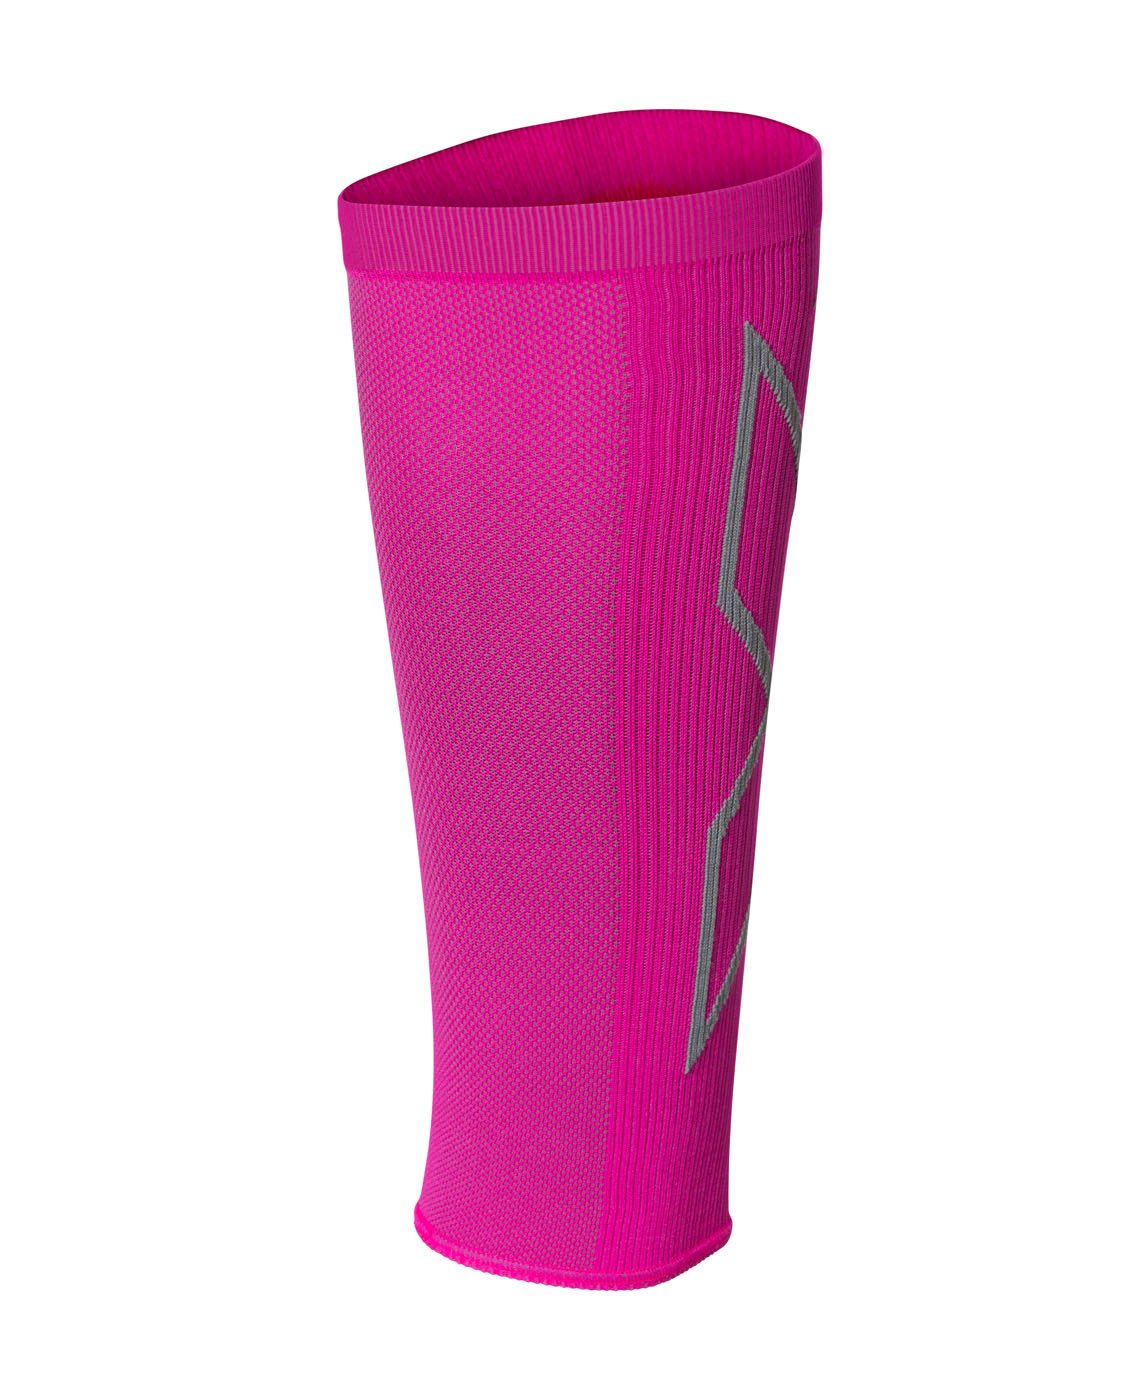 X Compression Calf Sleeves